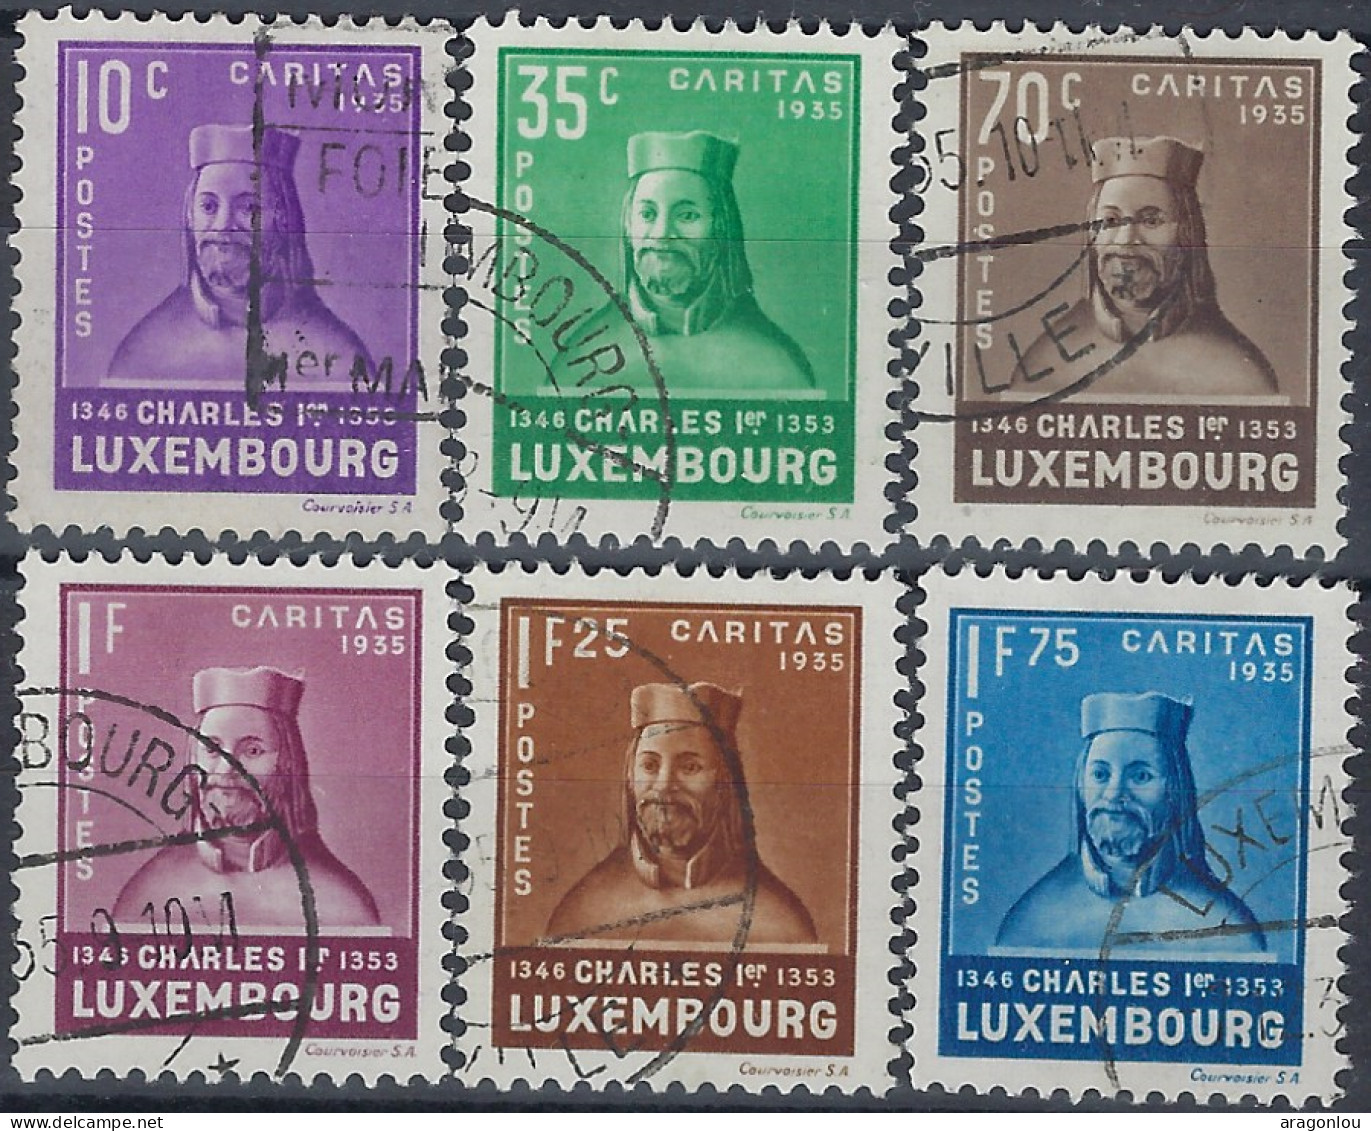 Luxembourg - Luxemburrg - Timbres  1935    Charles Le 1ier     Série   ° - Gebruikt